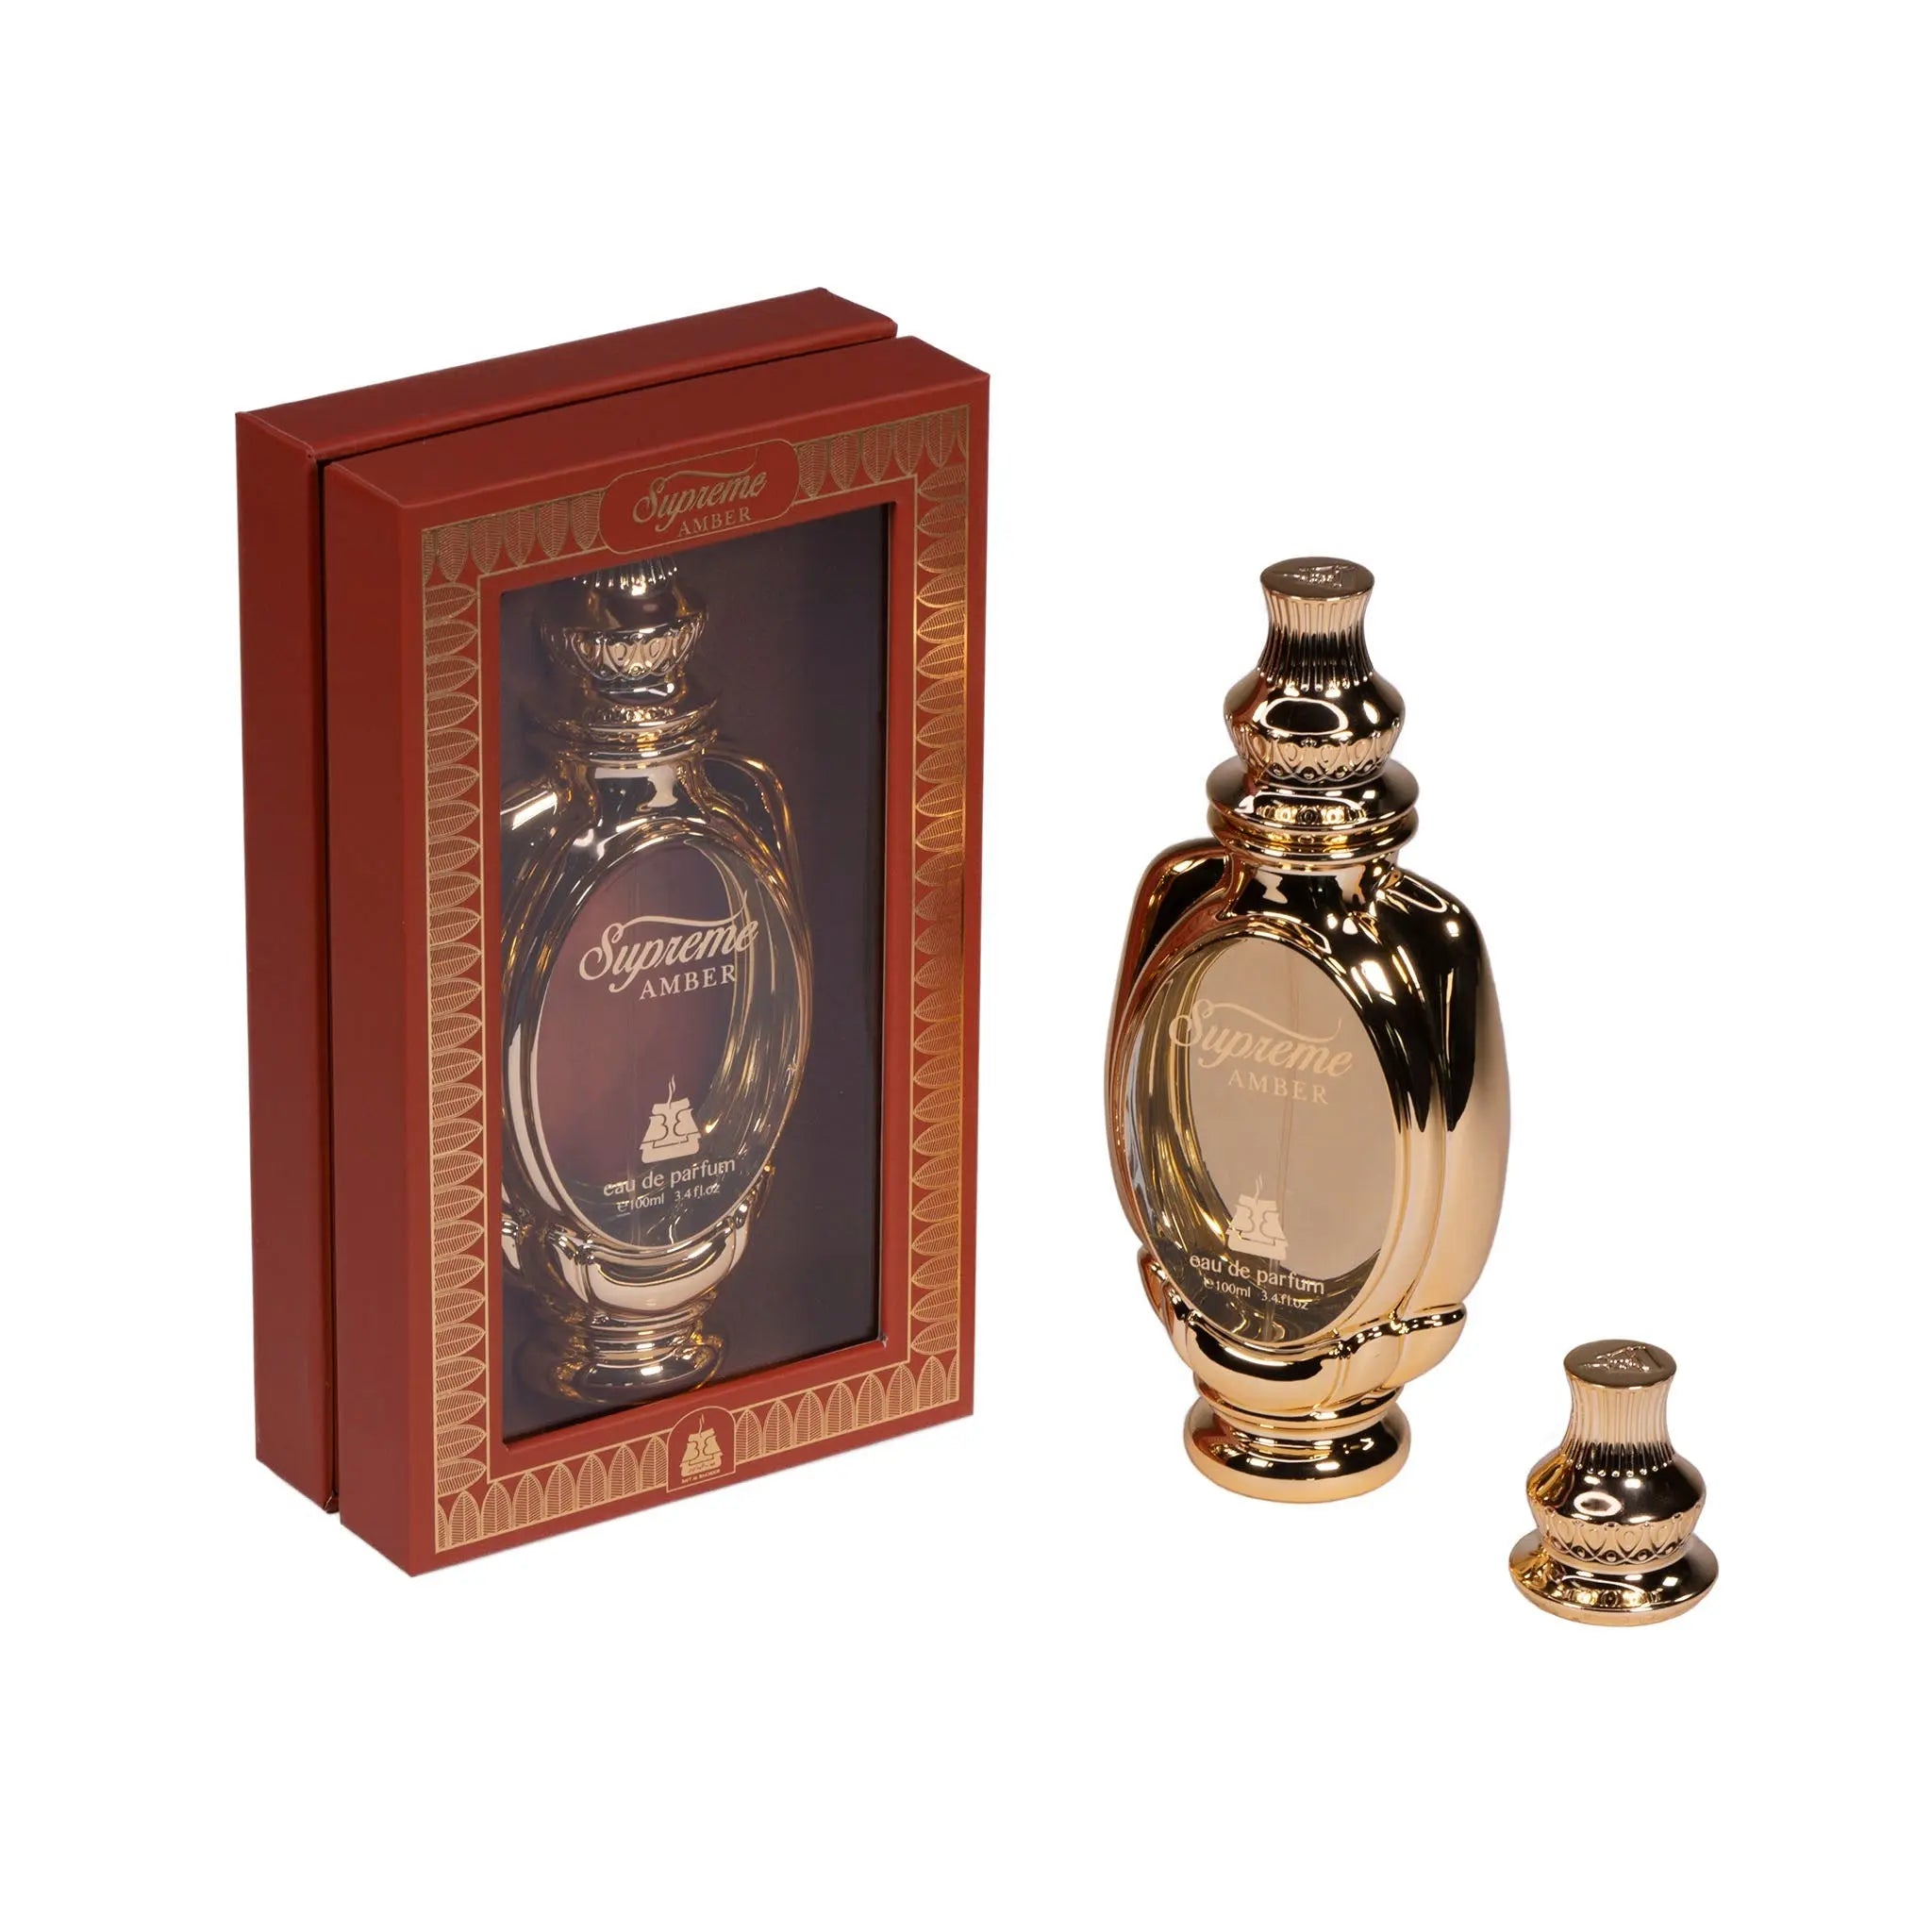 The image presents a luxurious perfume set, featuring a shiny golden-brown bottle with a traditional, rounded shape and an intricately designed cap. To the left, the matching packaging is a deep red box with a viewing window displaying the same bottle design and the words "Supreme AMBER" in elegant font, along with "eau de parfum" below. The box is adorned with golden patterns and trim that complement the bottle's design. 